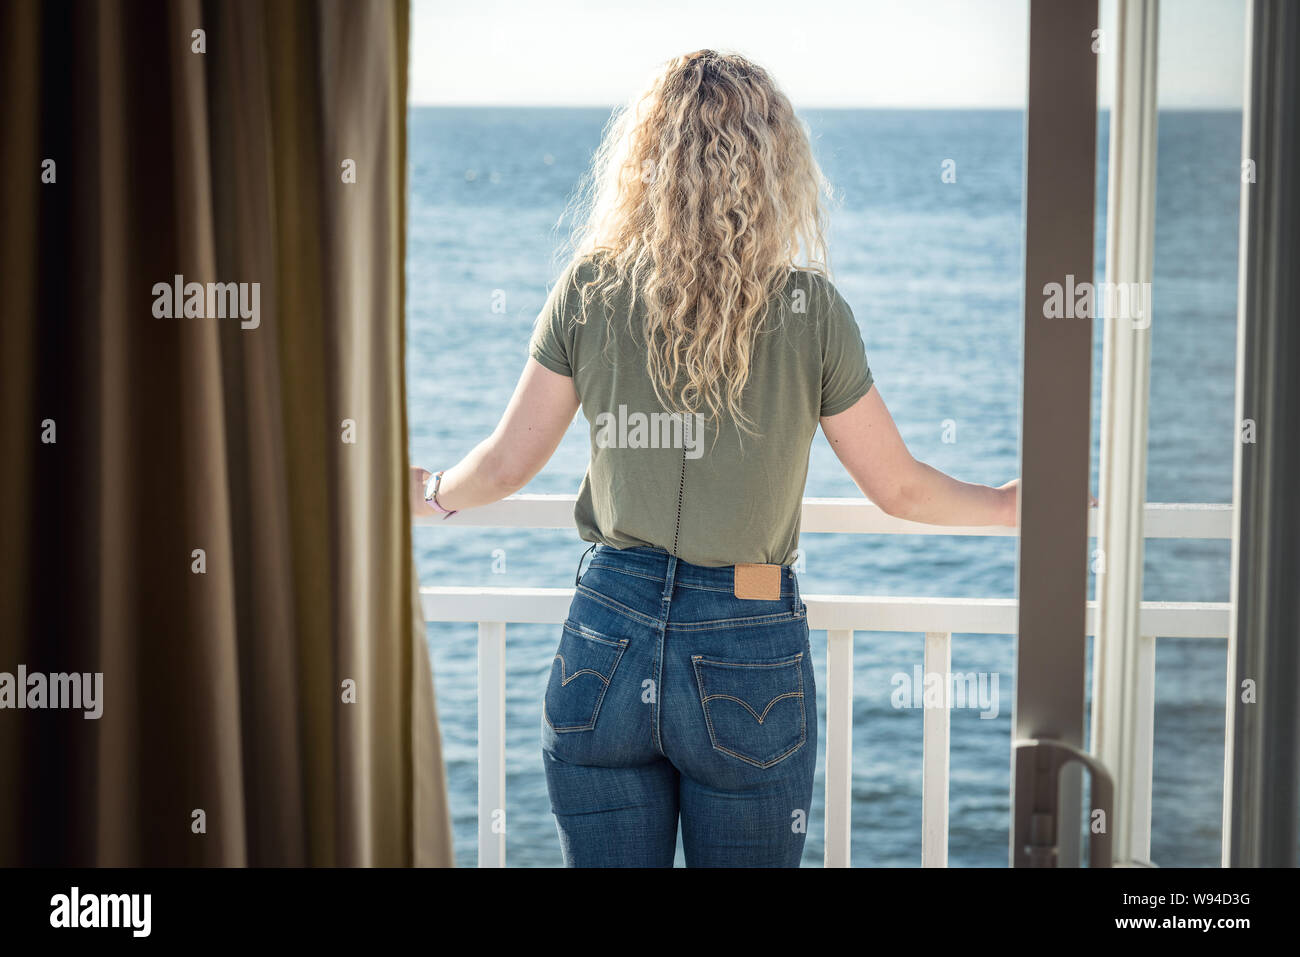 Blond woman looking at the view through the window Stock Photo